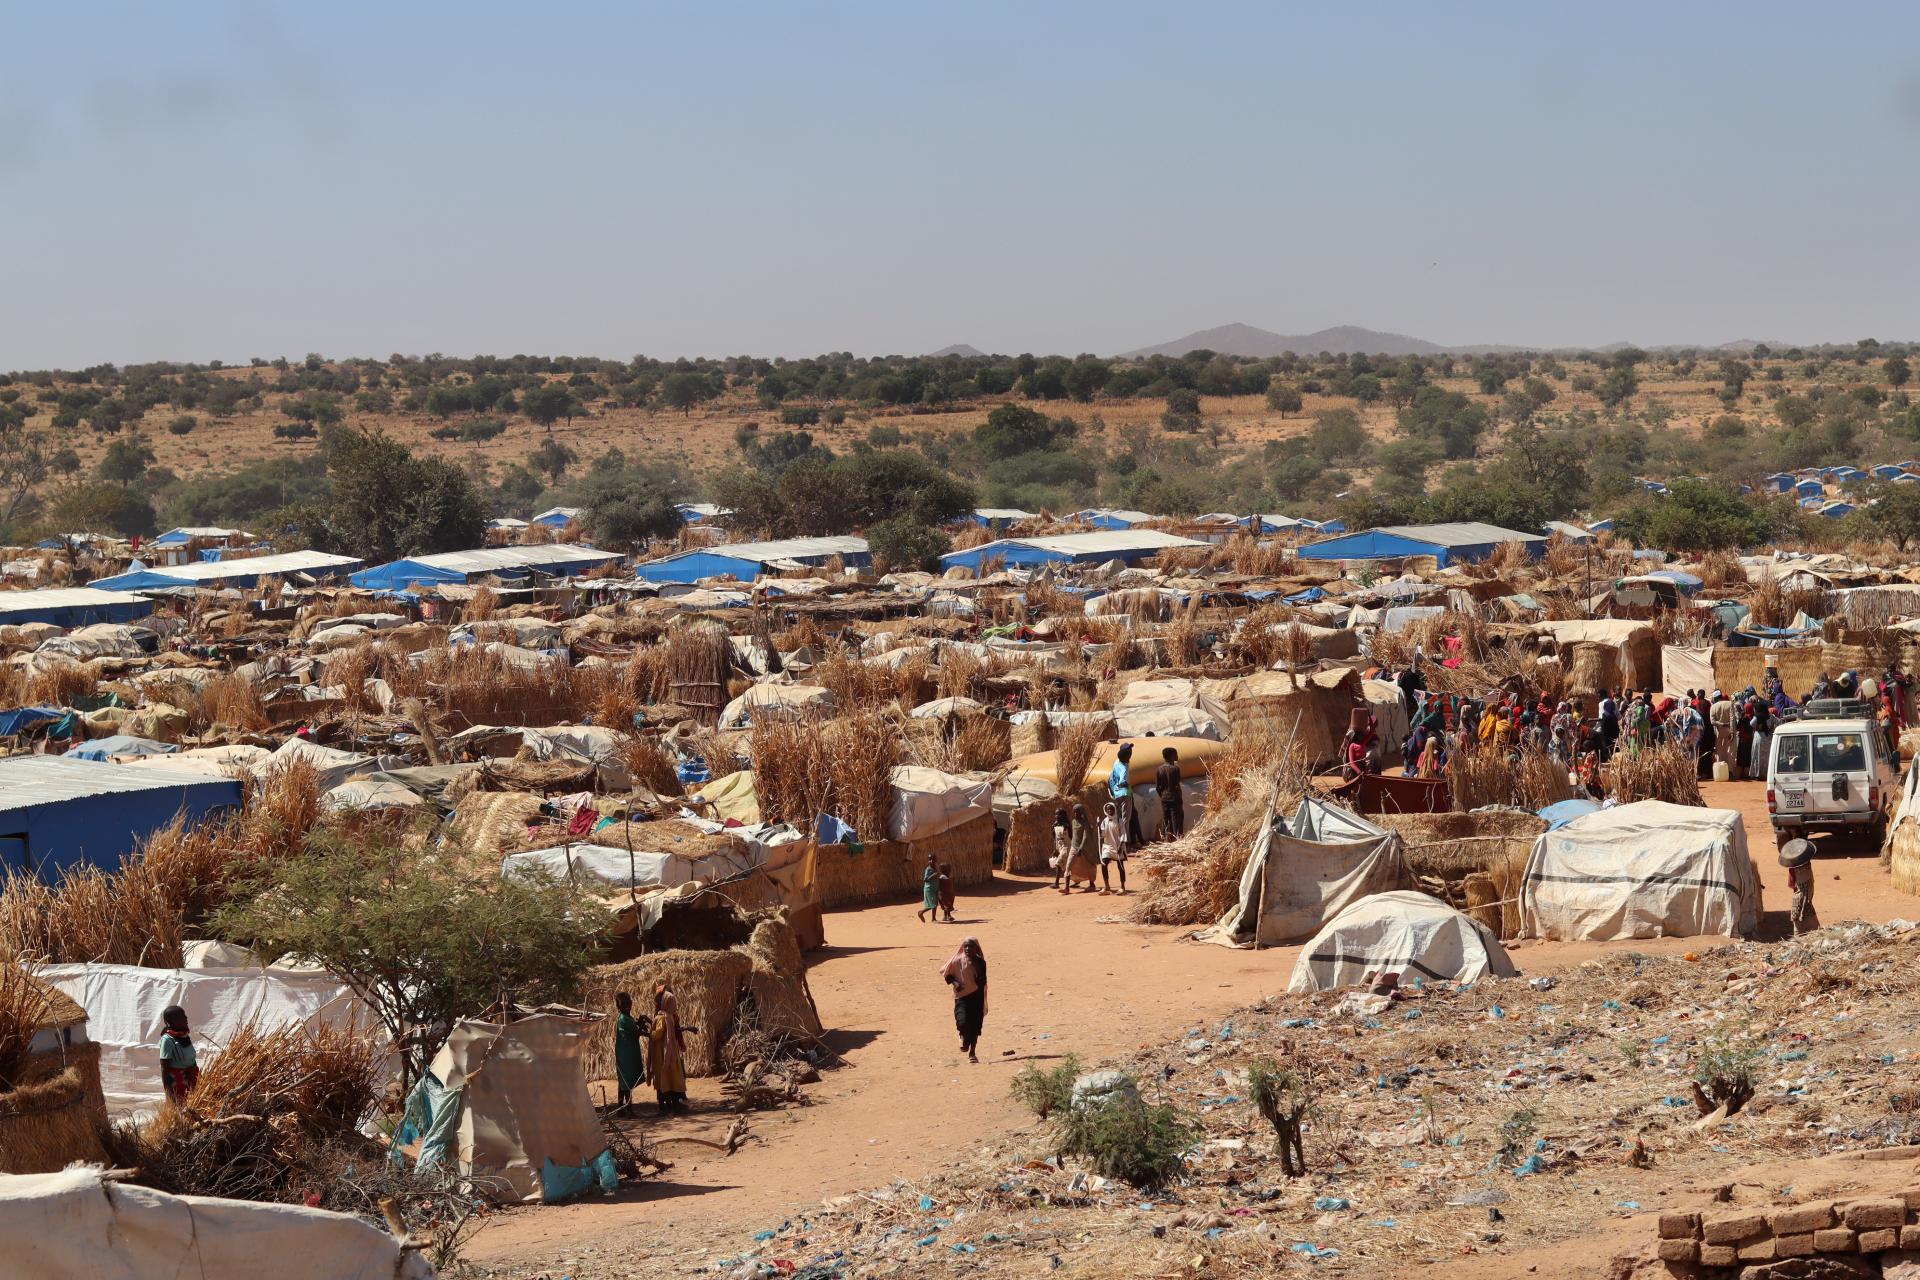  Ourang refugee camp, eastern Chad